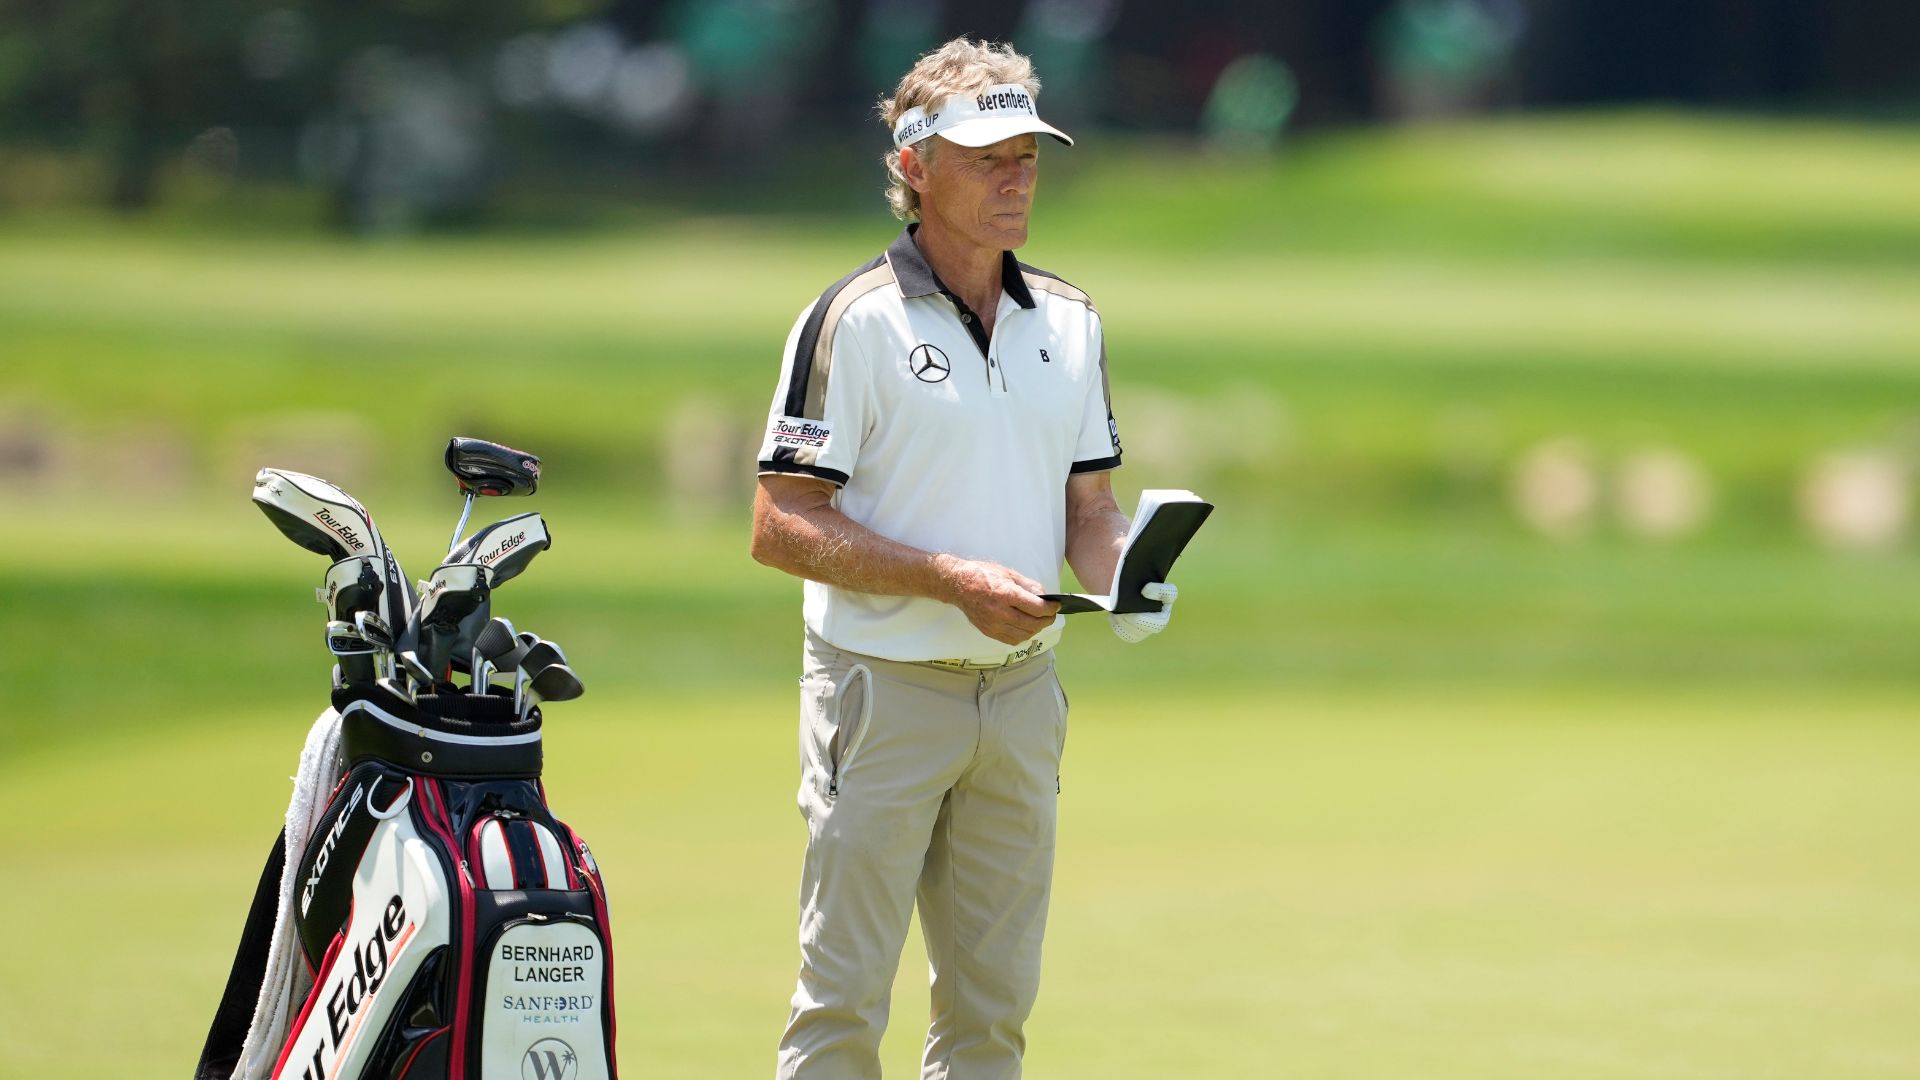 Bernhard Langer, 65, leads U.S. Senior Open halfway with records on the line